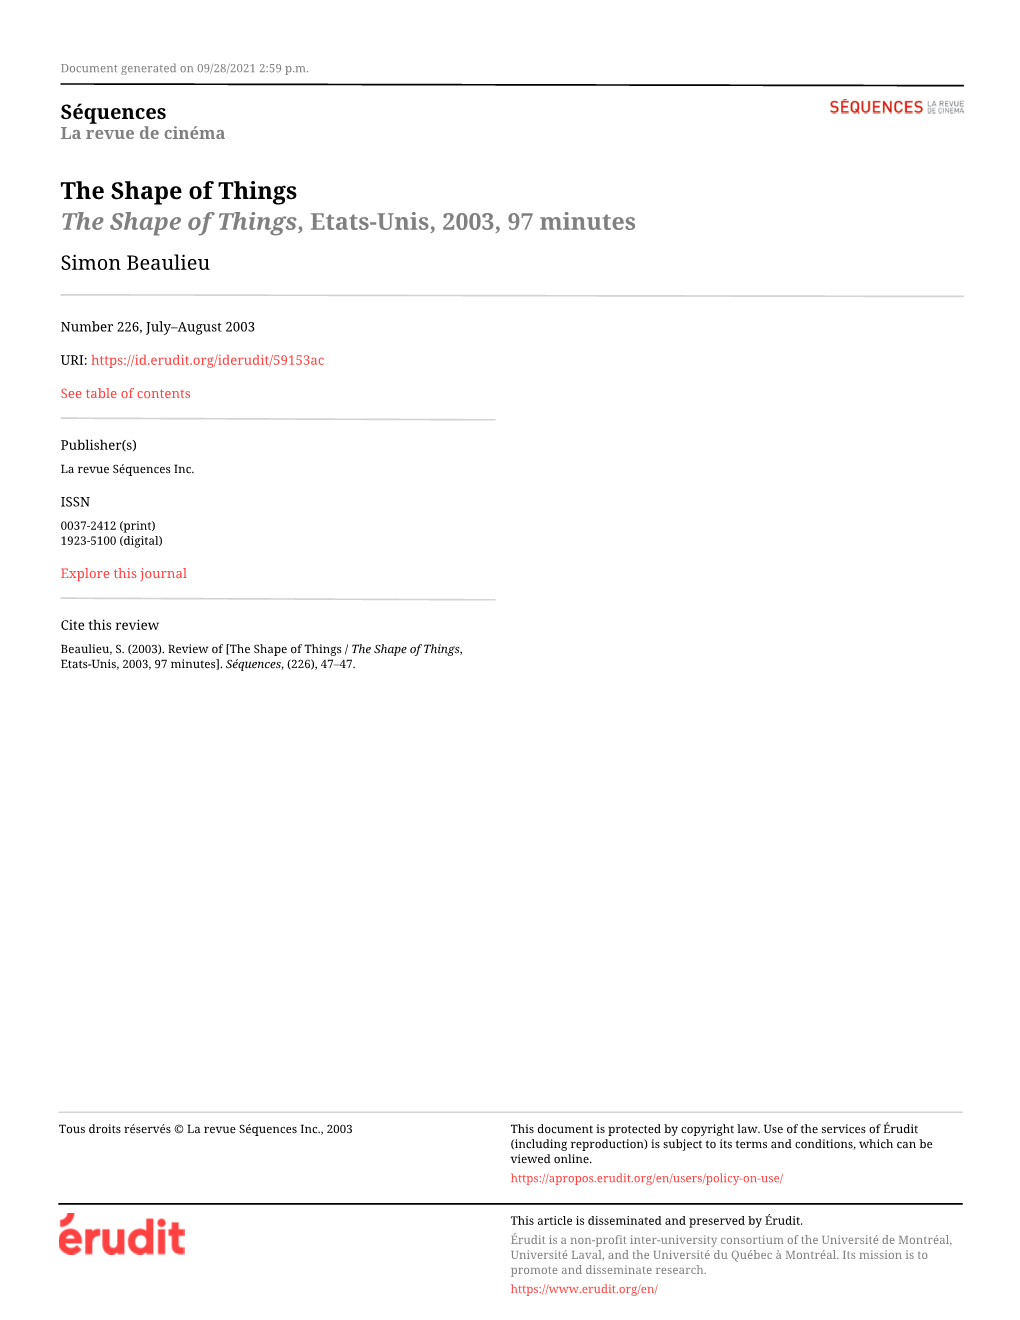 The Shape of Things / the Shape of Things, Etats-Unis, 2003, 97 Minutes]